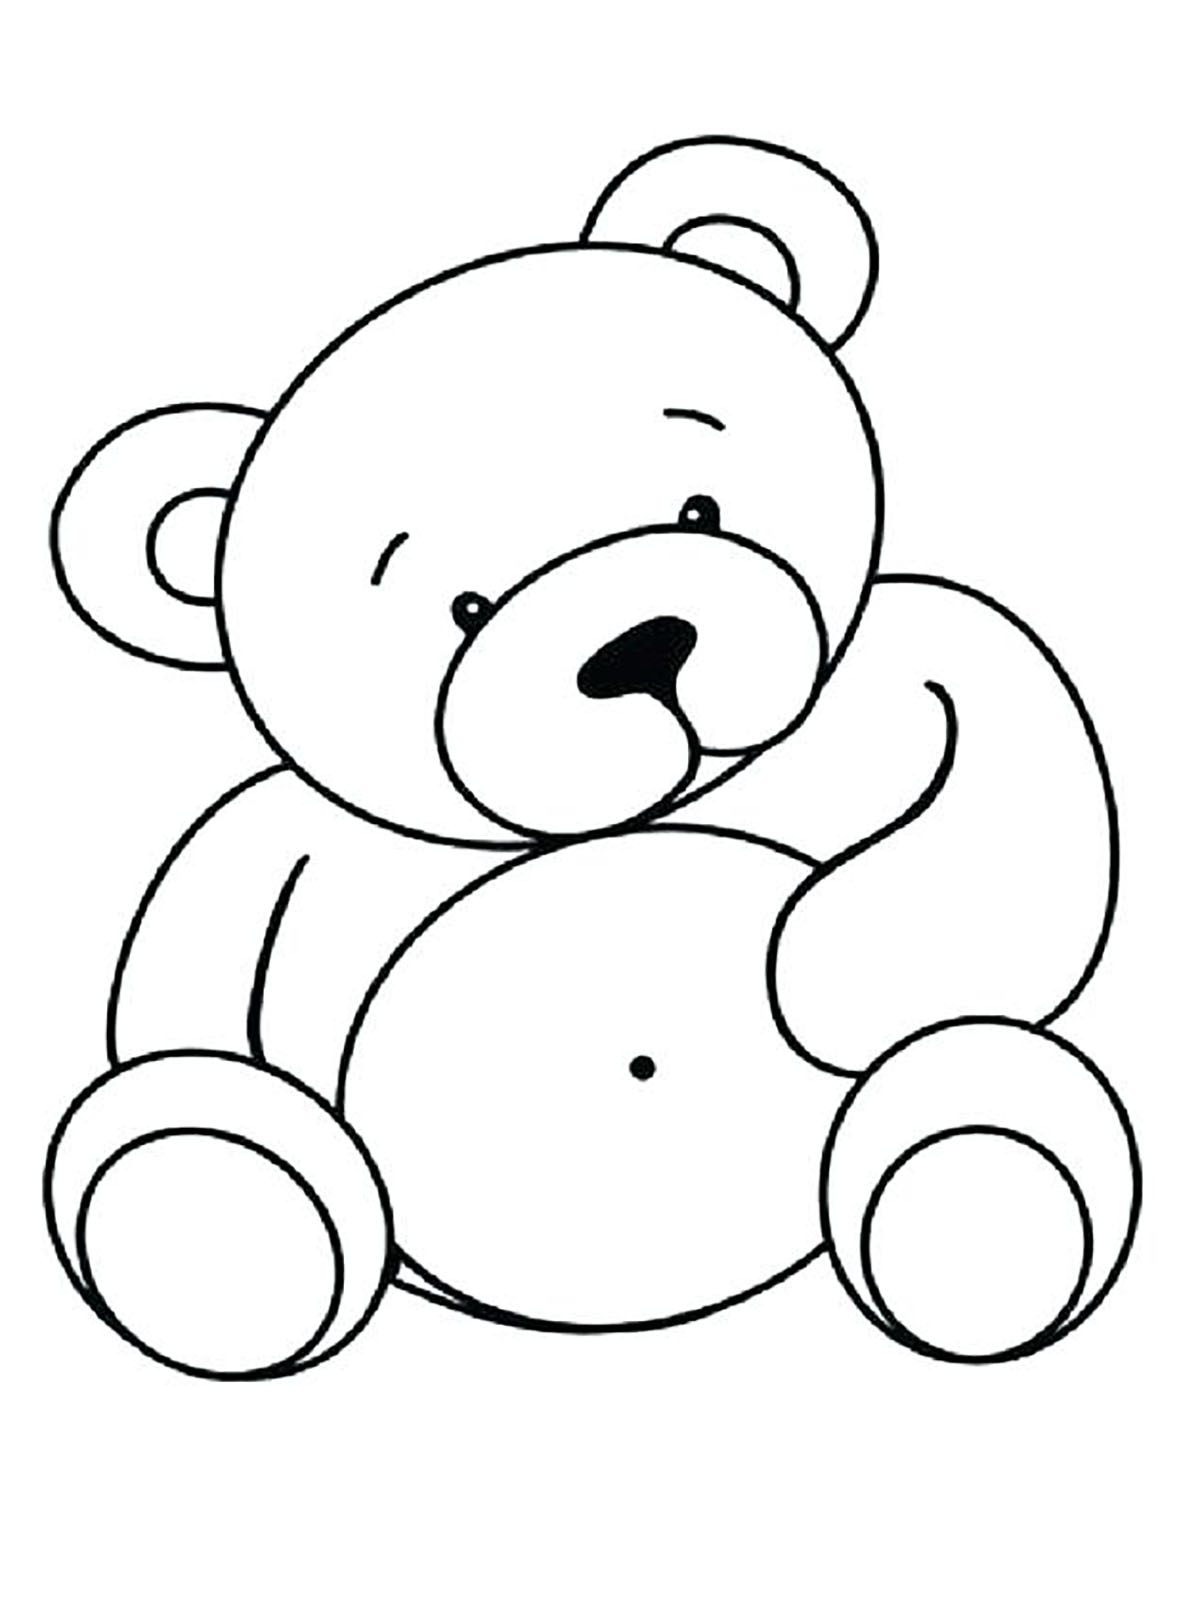 Big-bellied bear - Bears and Cubs Kids Coloring Pages